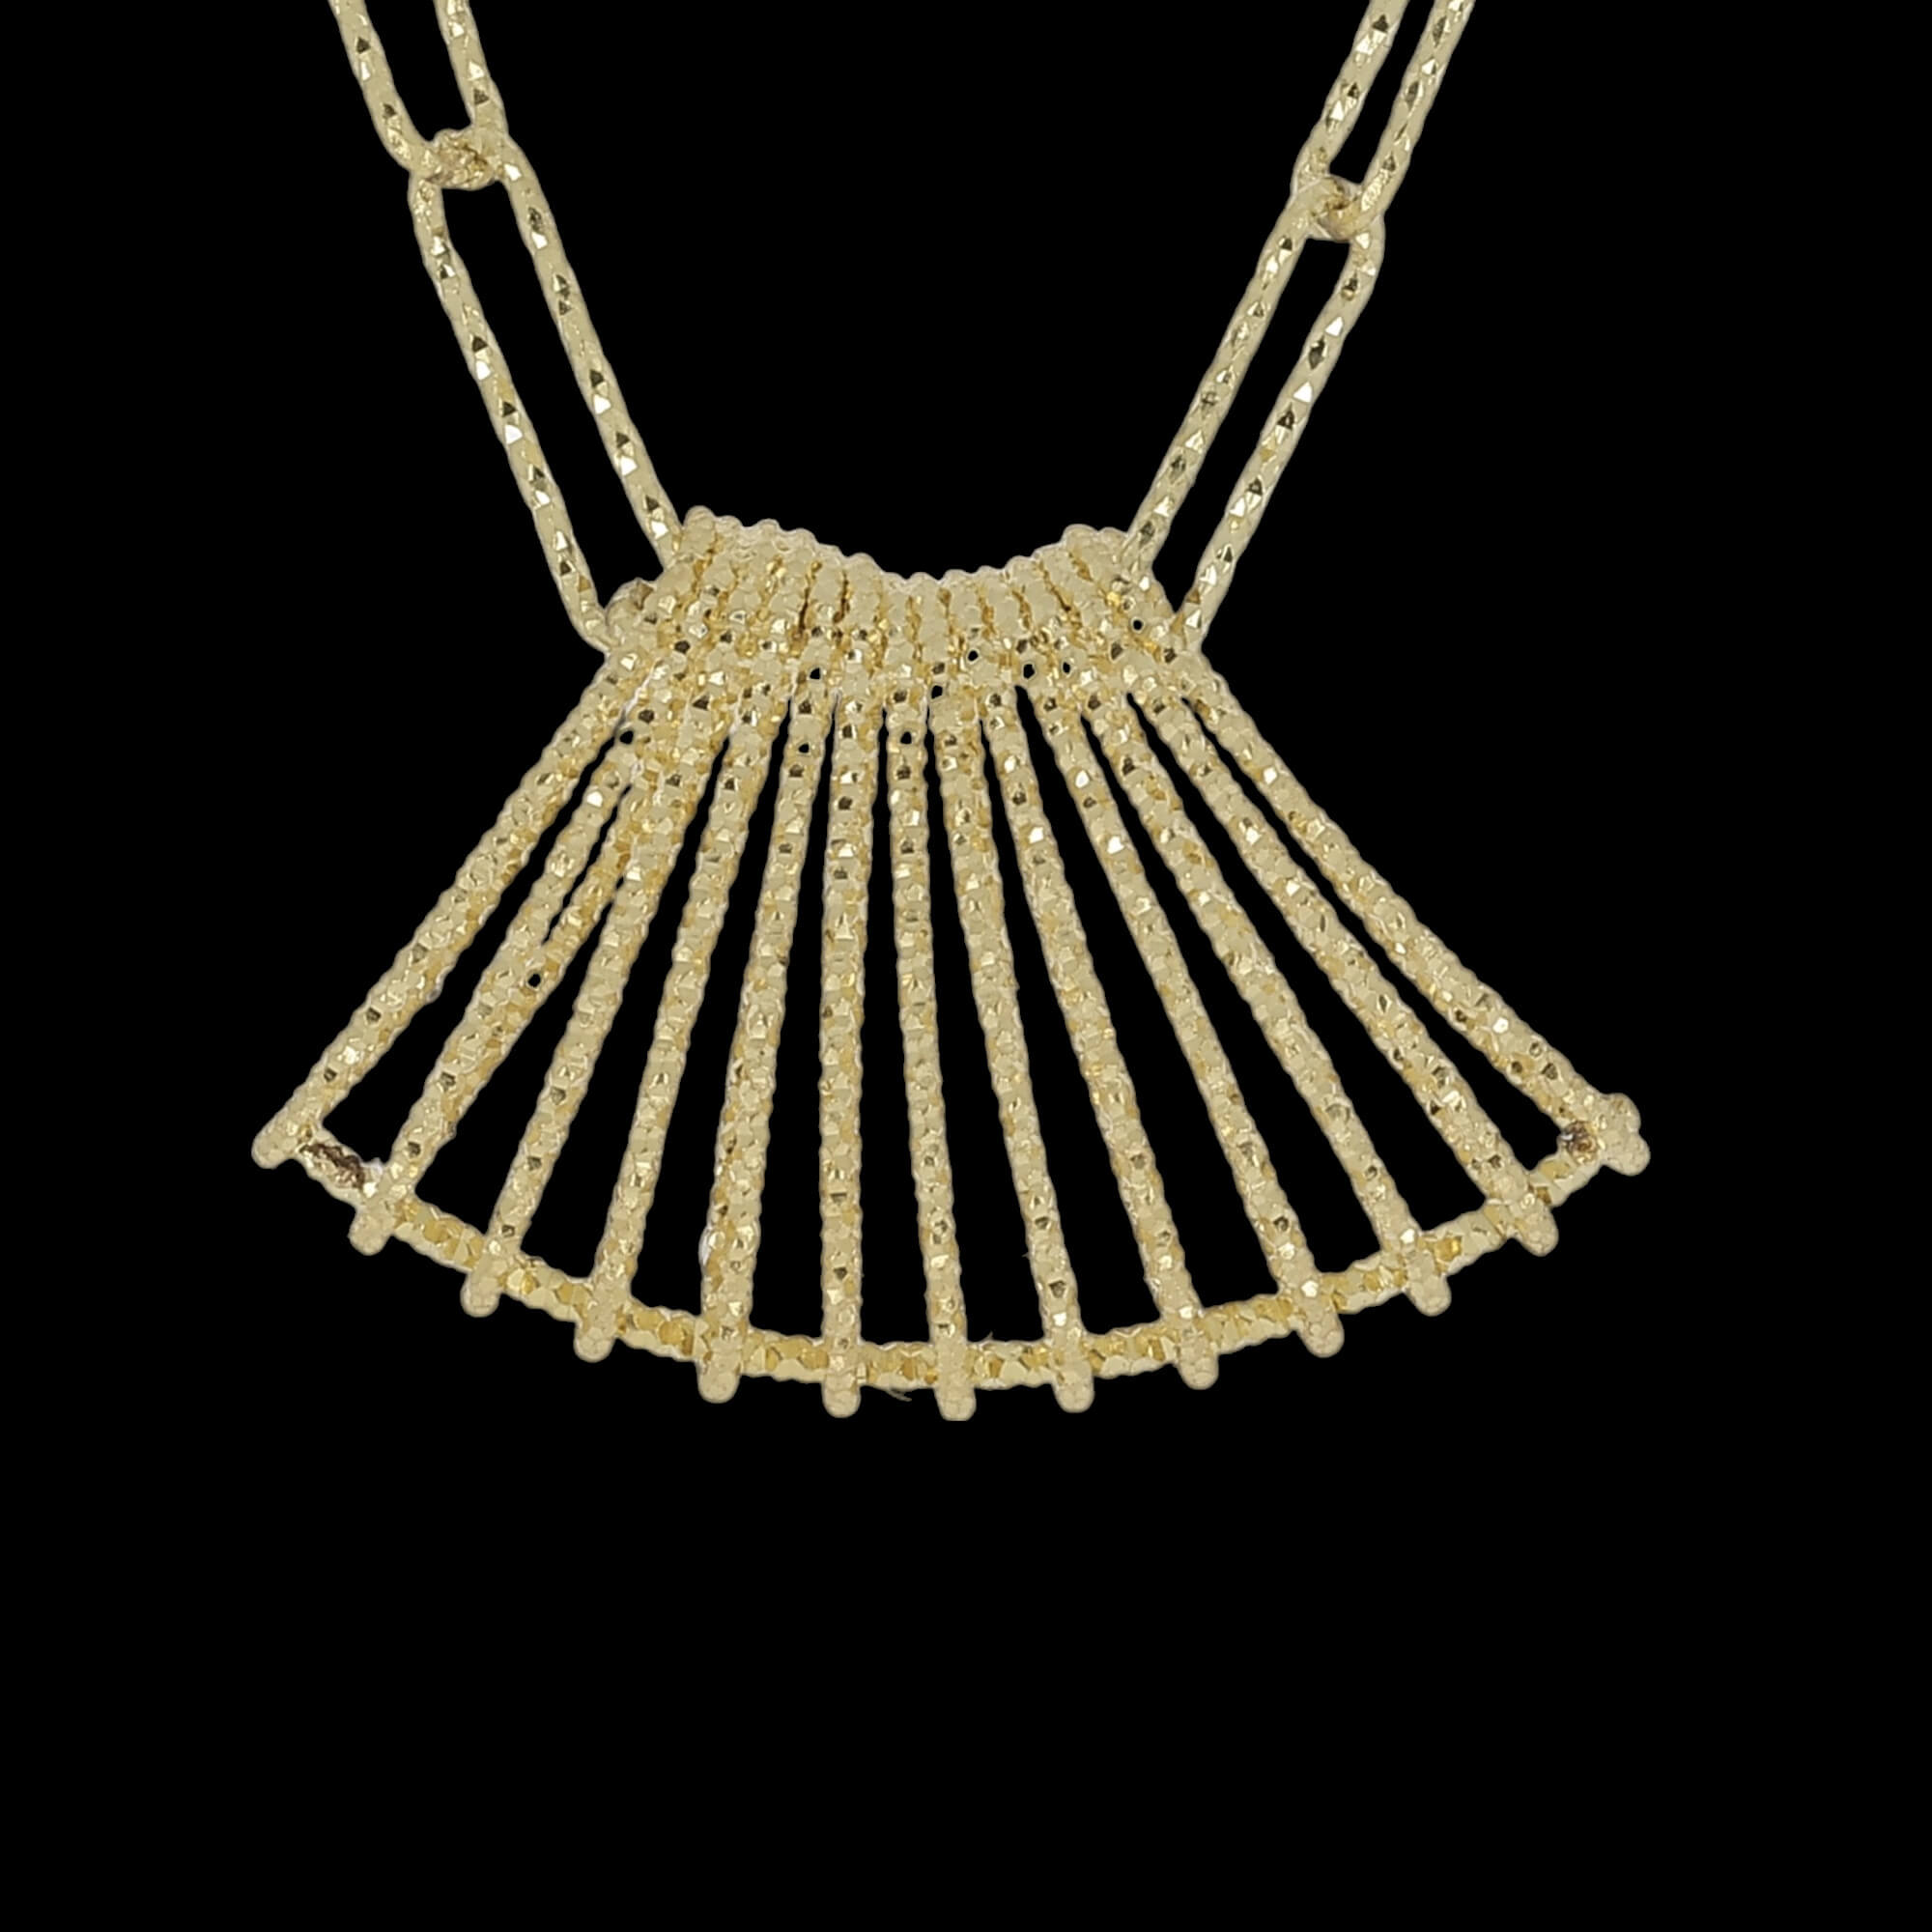 Gold chain made of 18kt gold with a decorated pendant